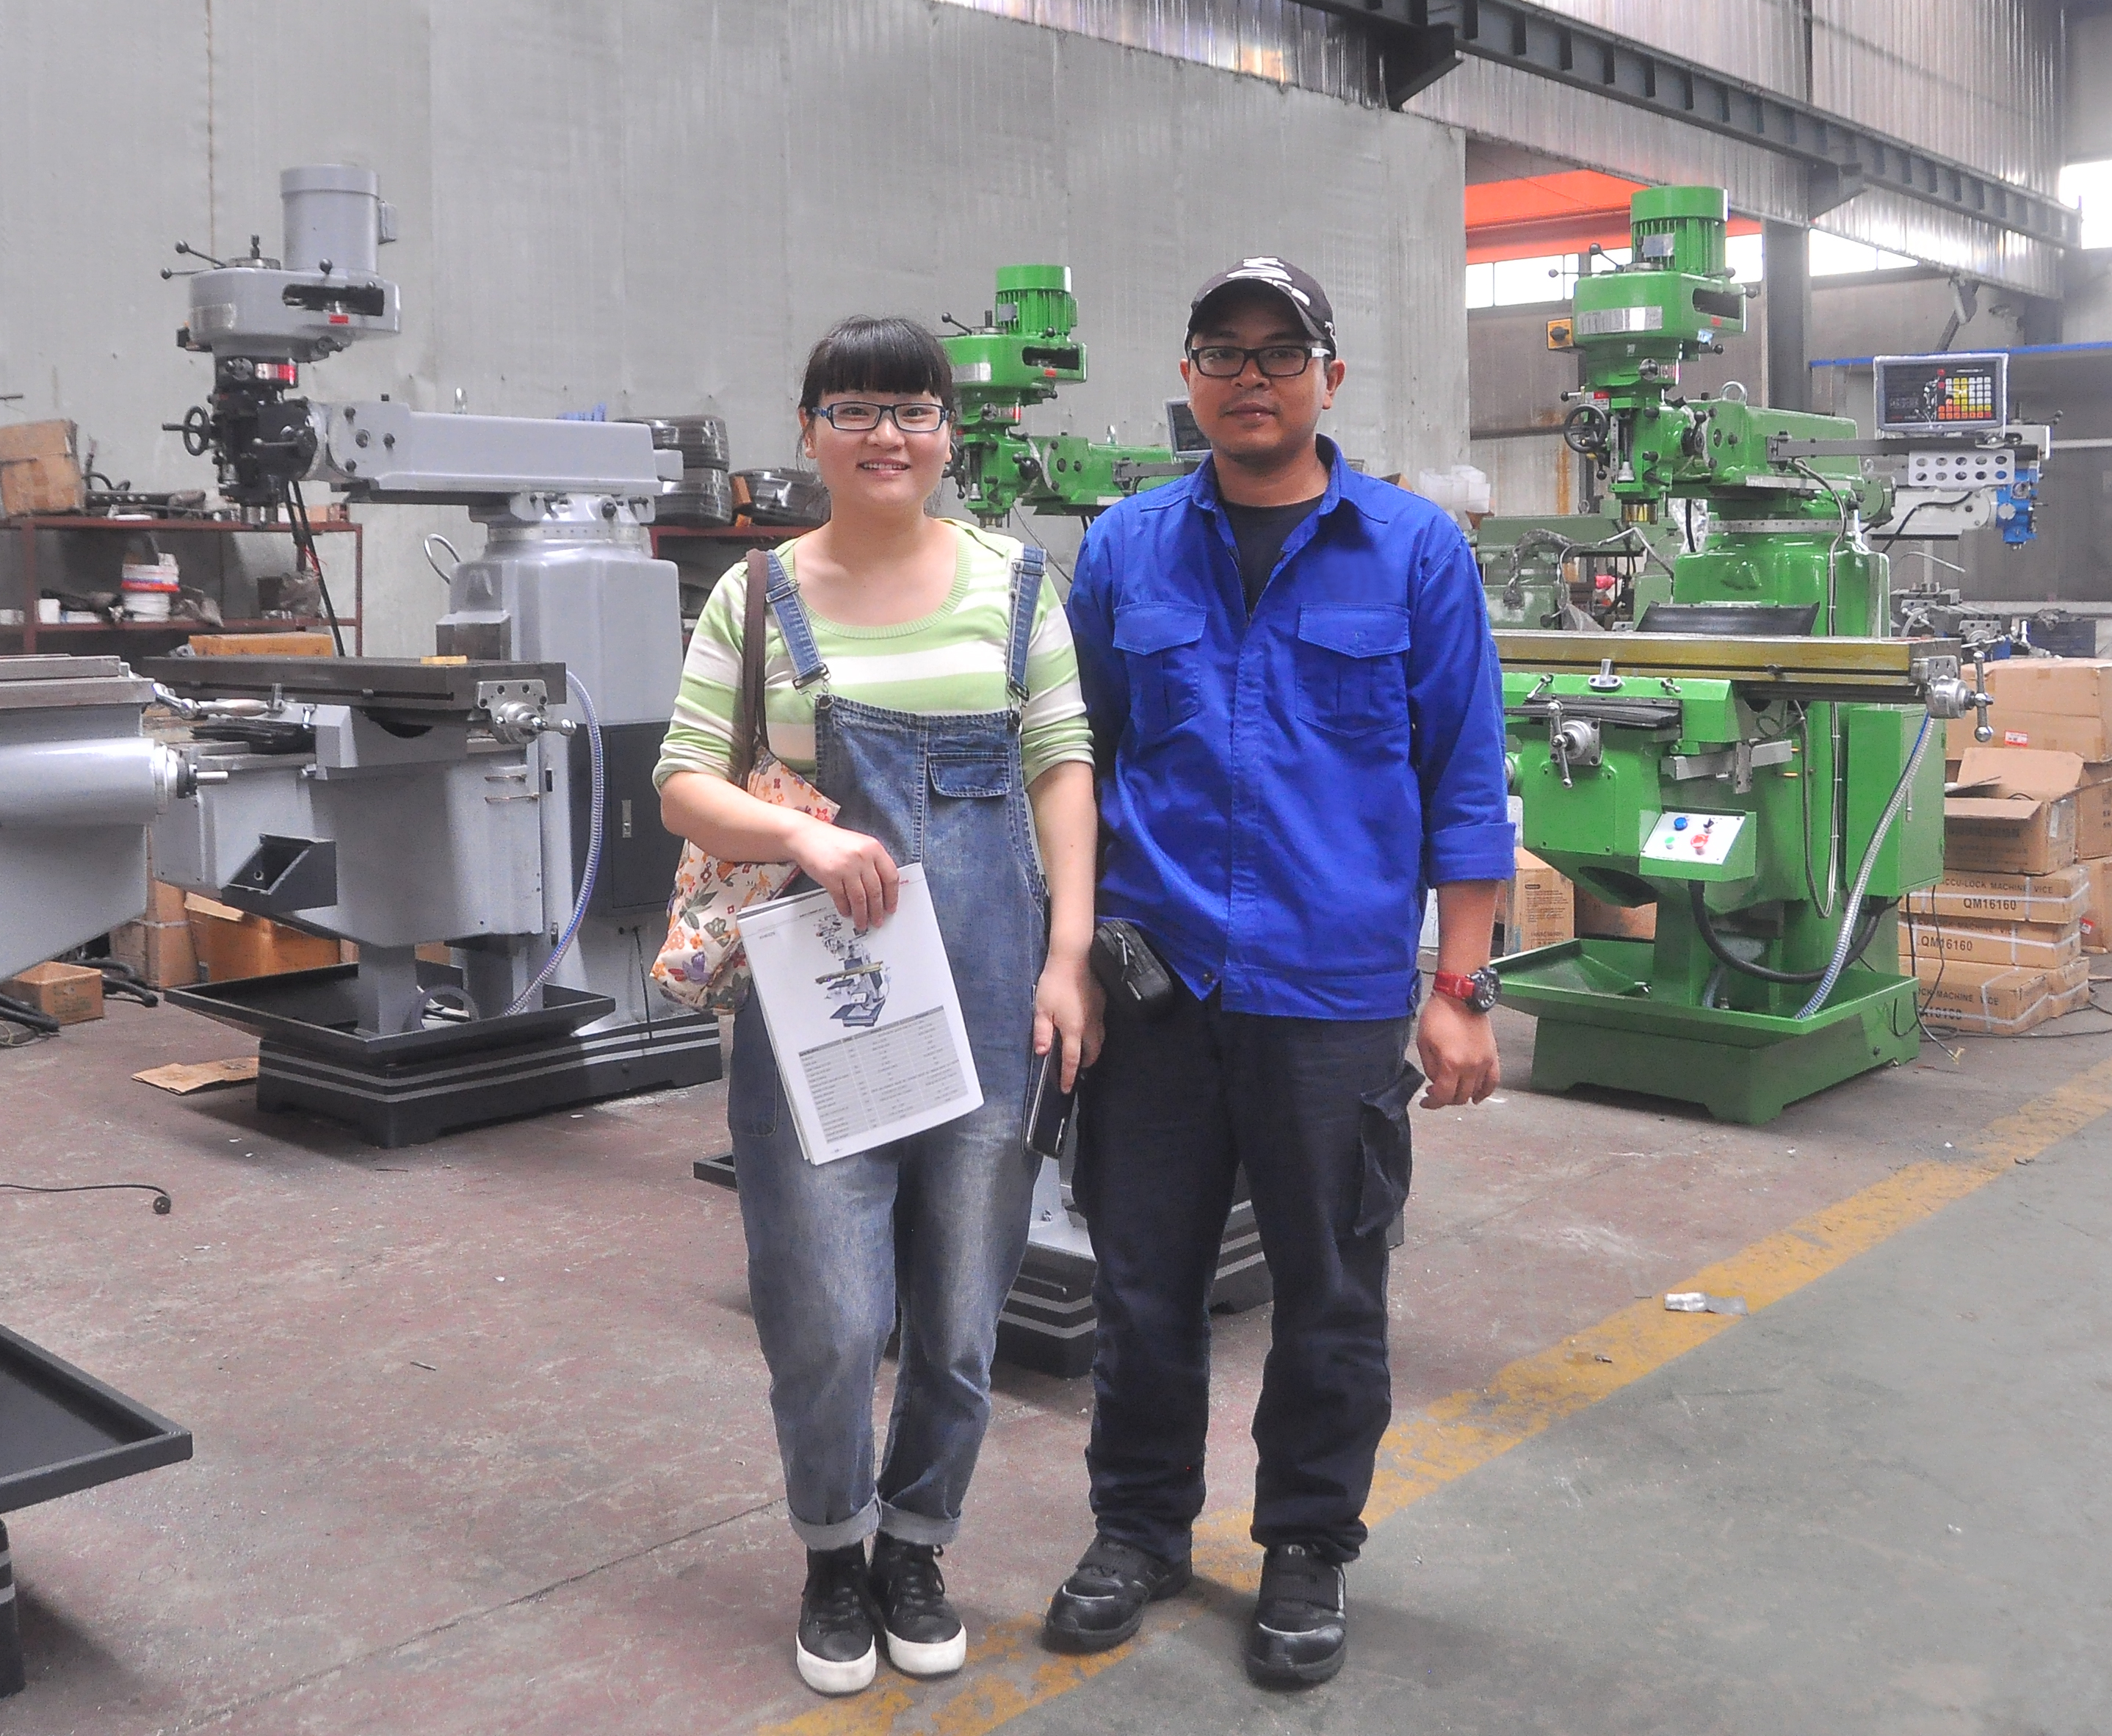 Malaysian customers came to visit the factory and were very interested in our milling machines, slotting machines, machining centers and other machines, and finally signed an order